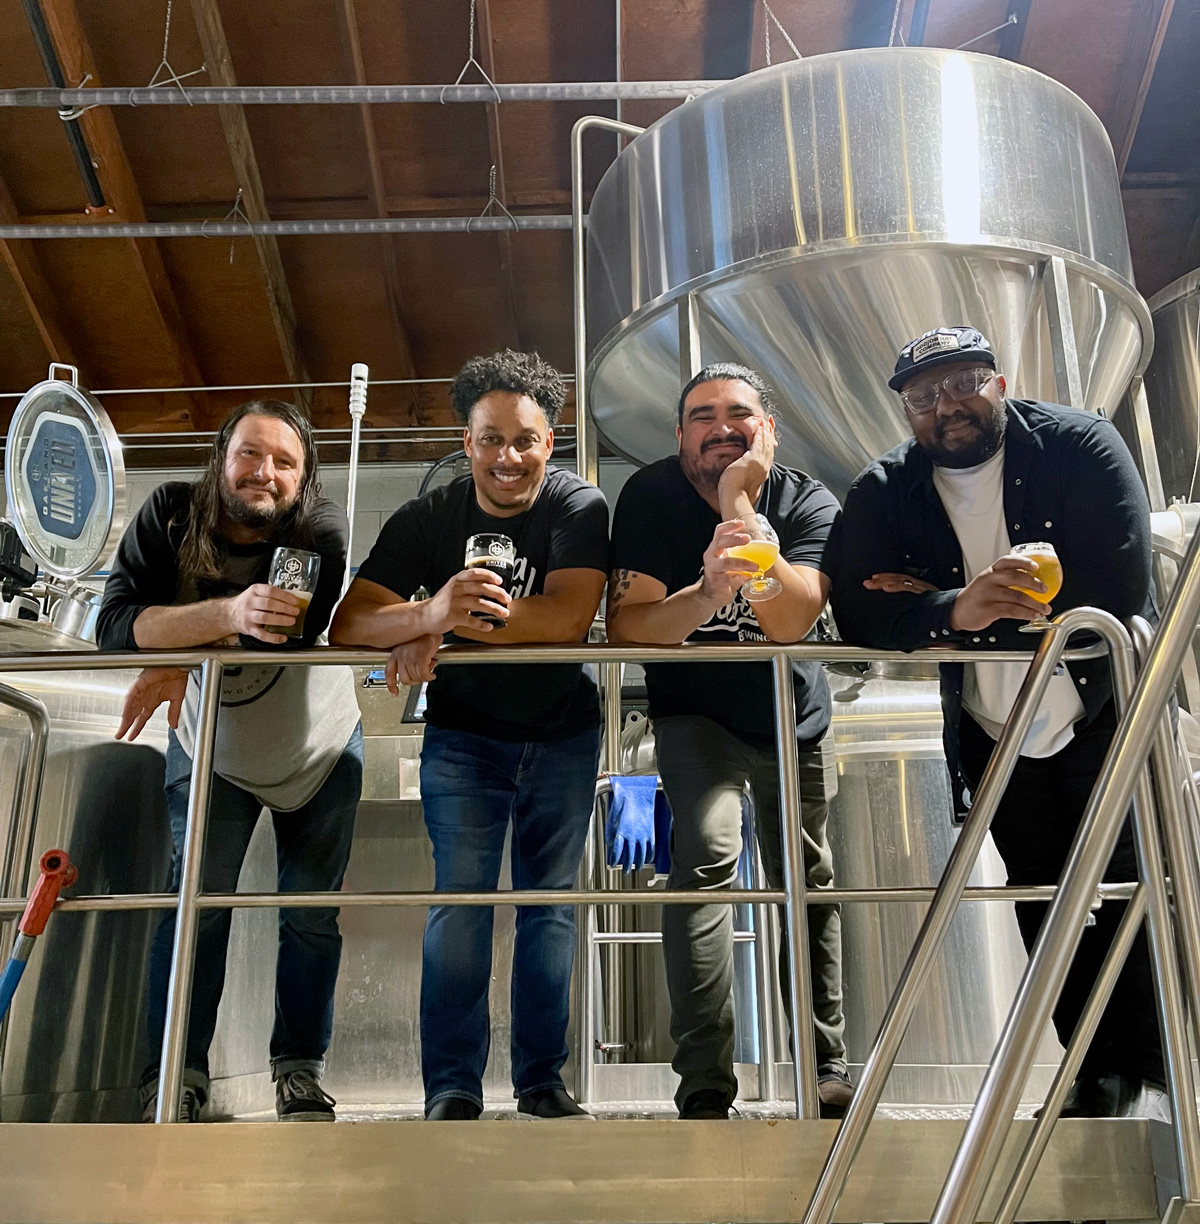 Collab with Hella Coastal brewing showing brewers at brewhouse